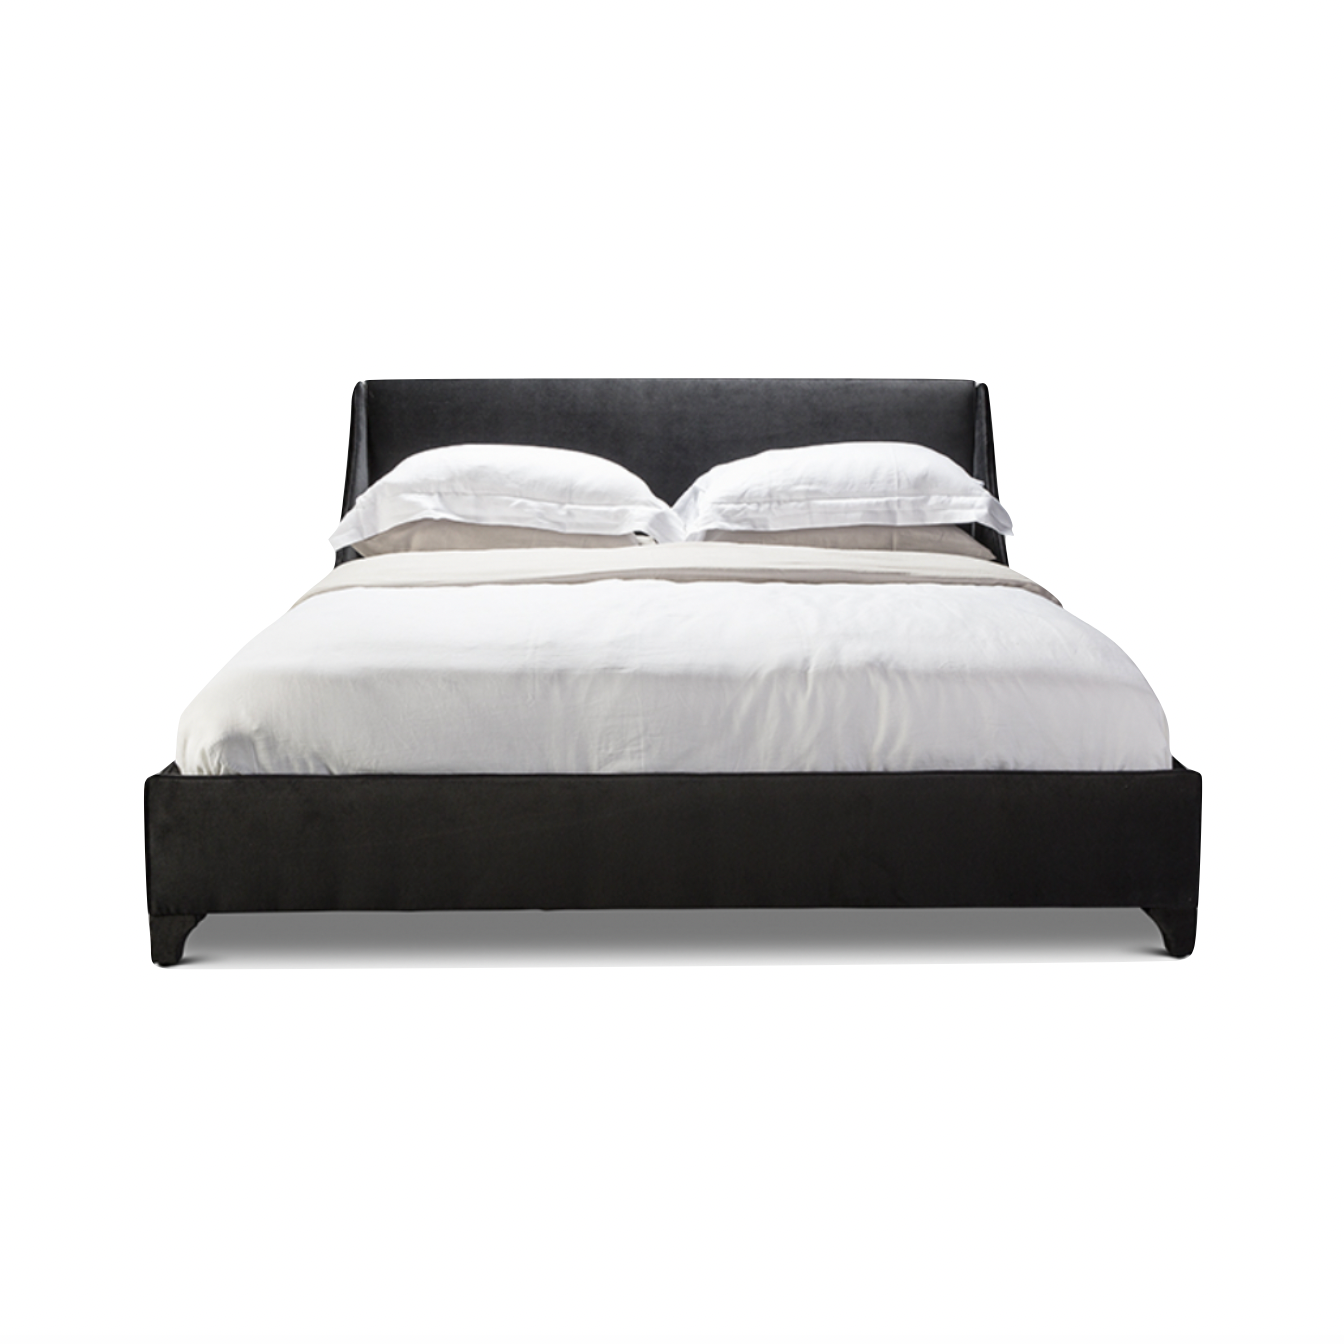 A Verellen Modern, the Mabel Bed is a curved beauty. This bed completes the mood for any master bedroom and has these features:   double needle stitch detail upholstered legs platform style base mattress only – not used with boxspring